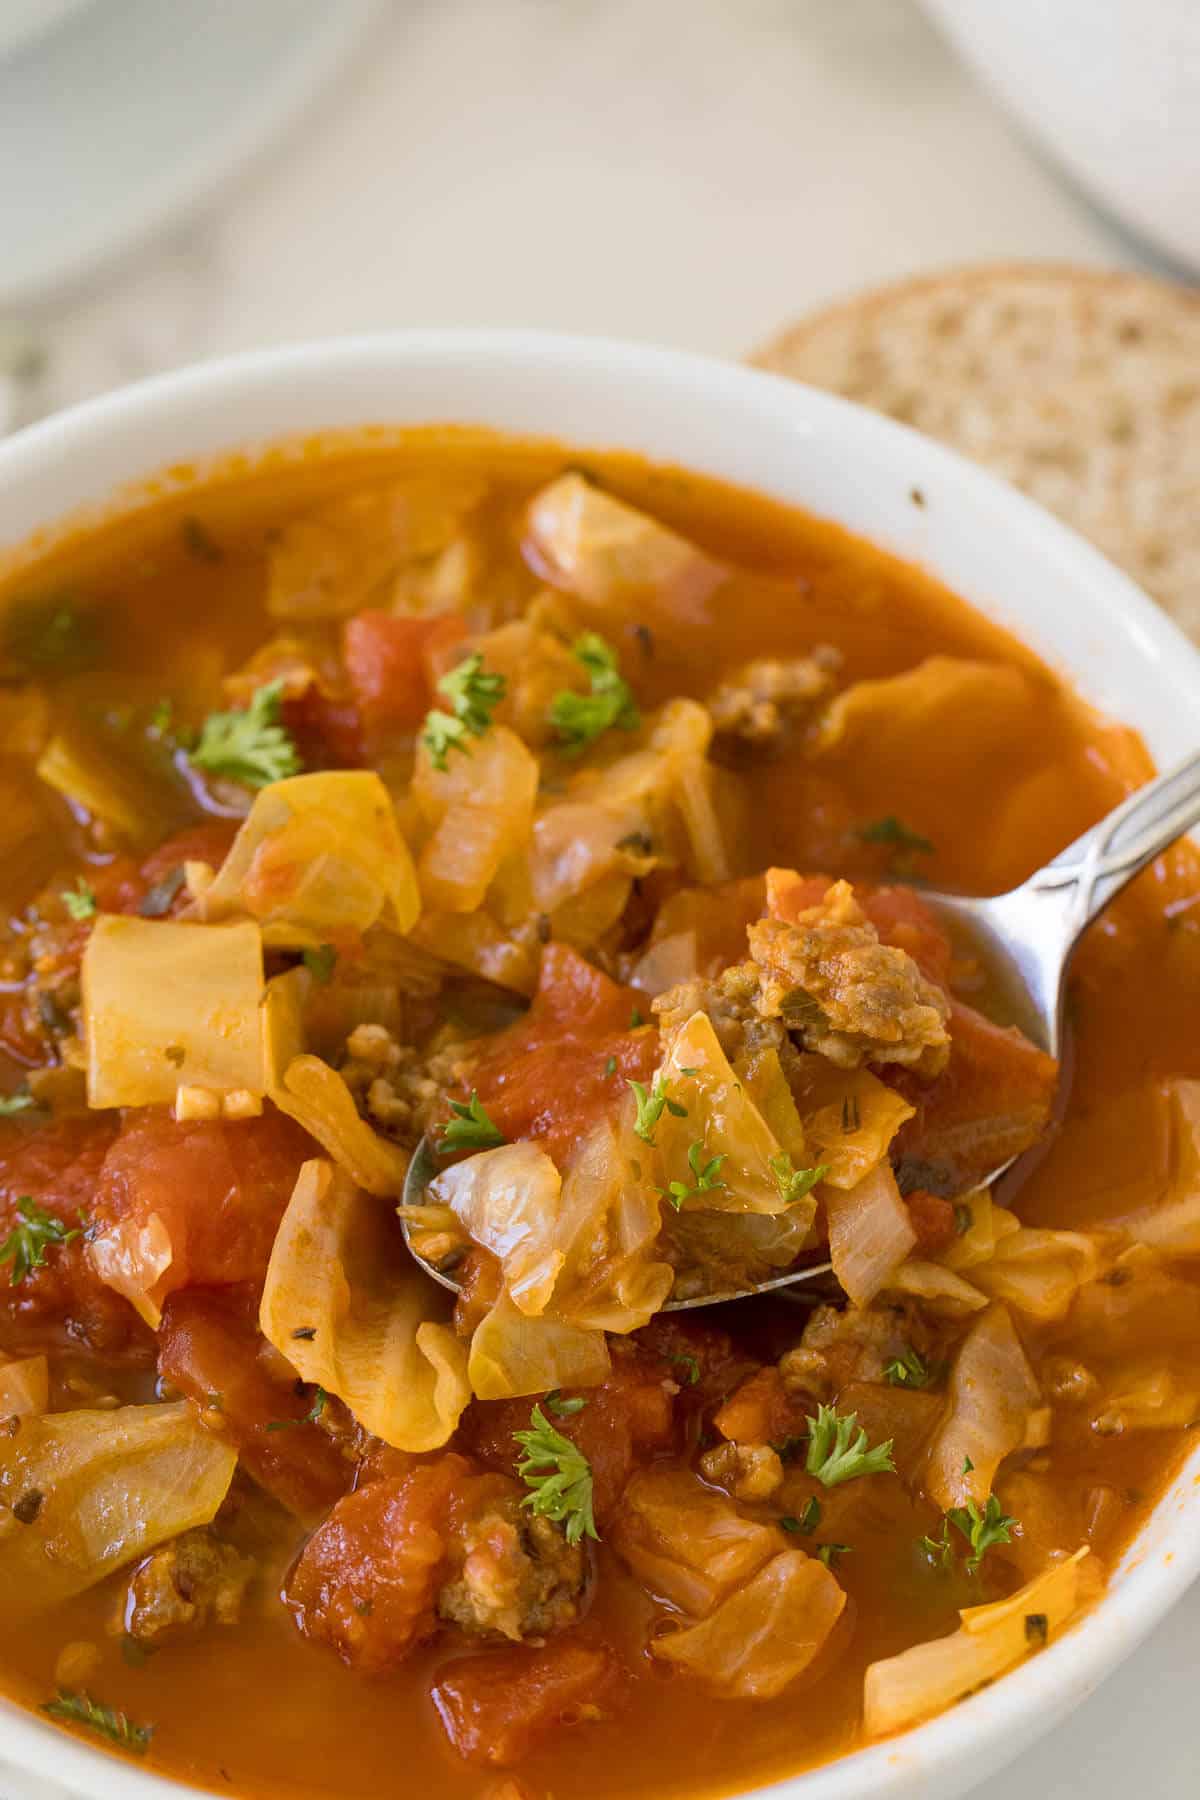 Sausage and cabbage soup in a bowl with a spoon.